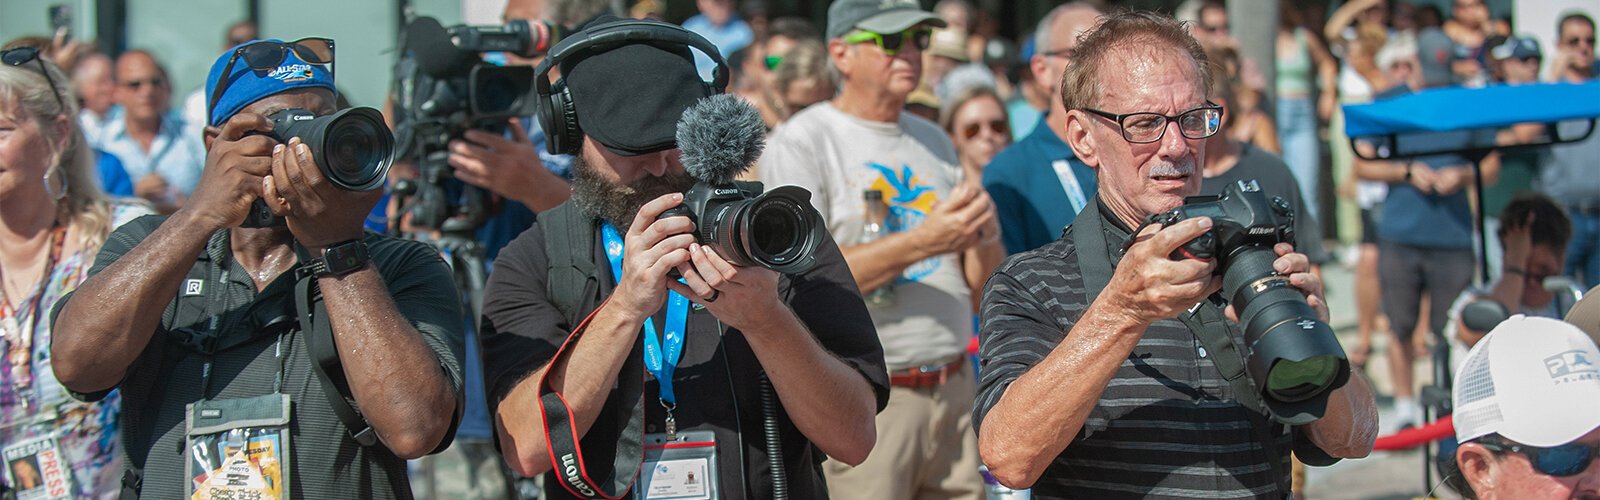 There were almost as many cameras as there were dignitaries during the ribbon-cutting ceremony for the new Coachman Park and The Sound concert venue in Clearwater.